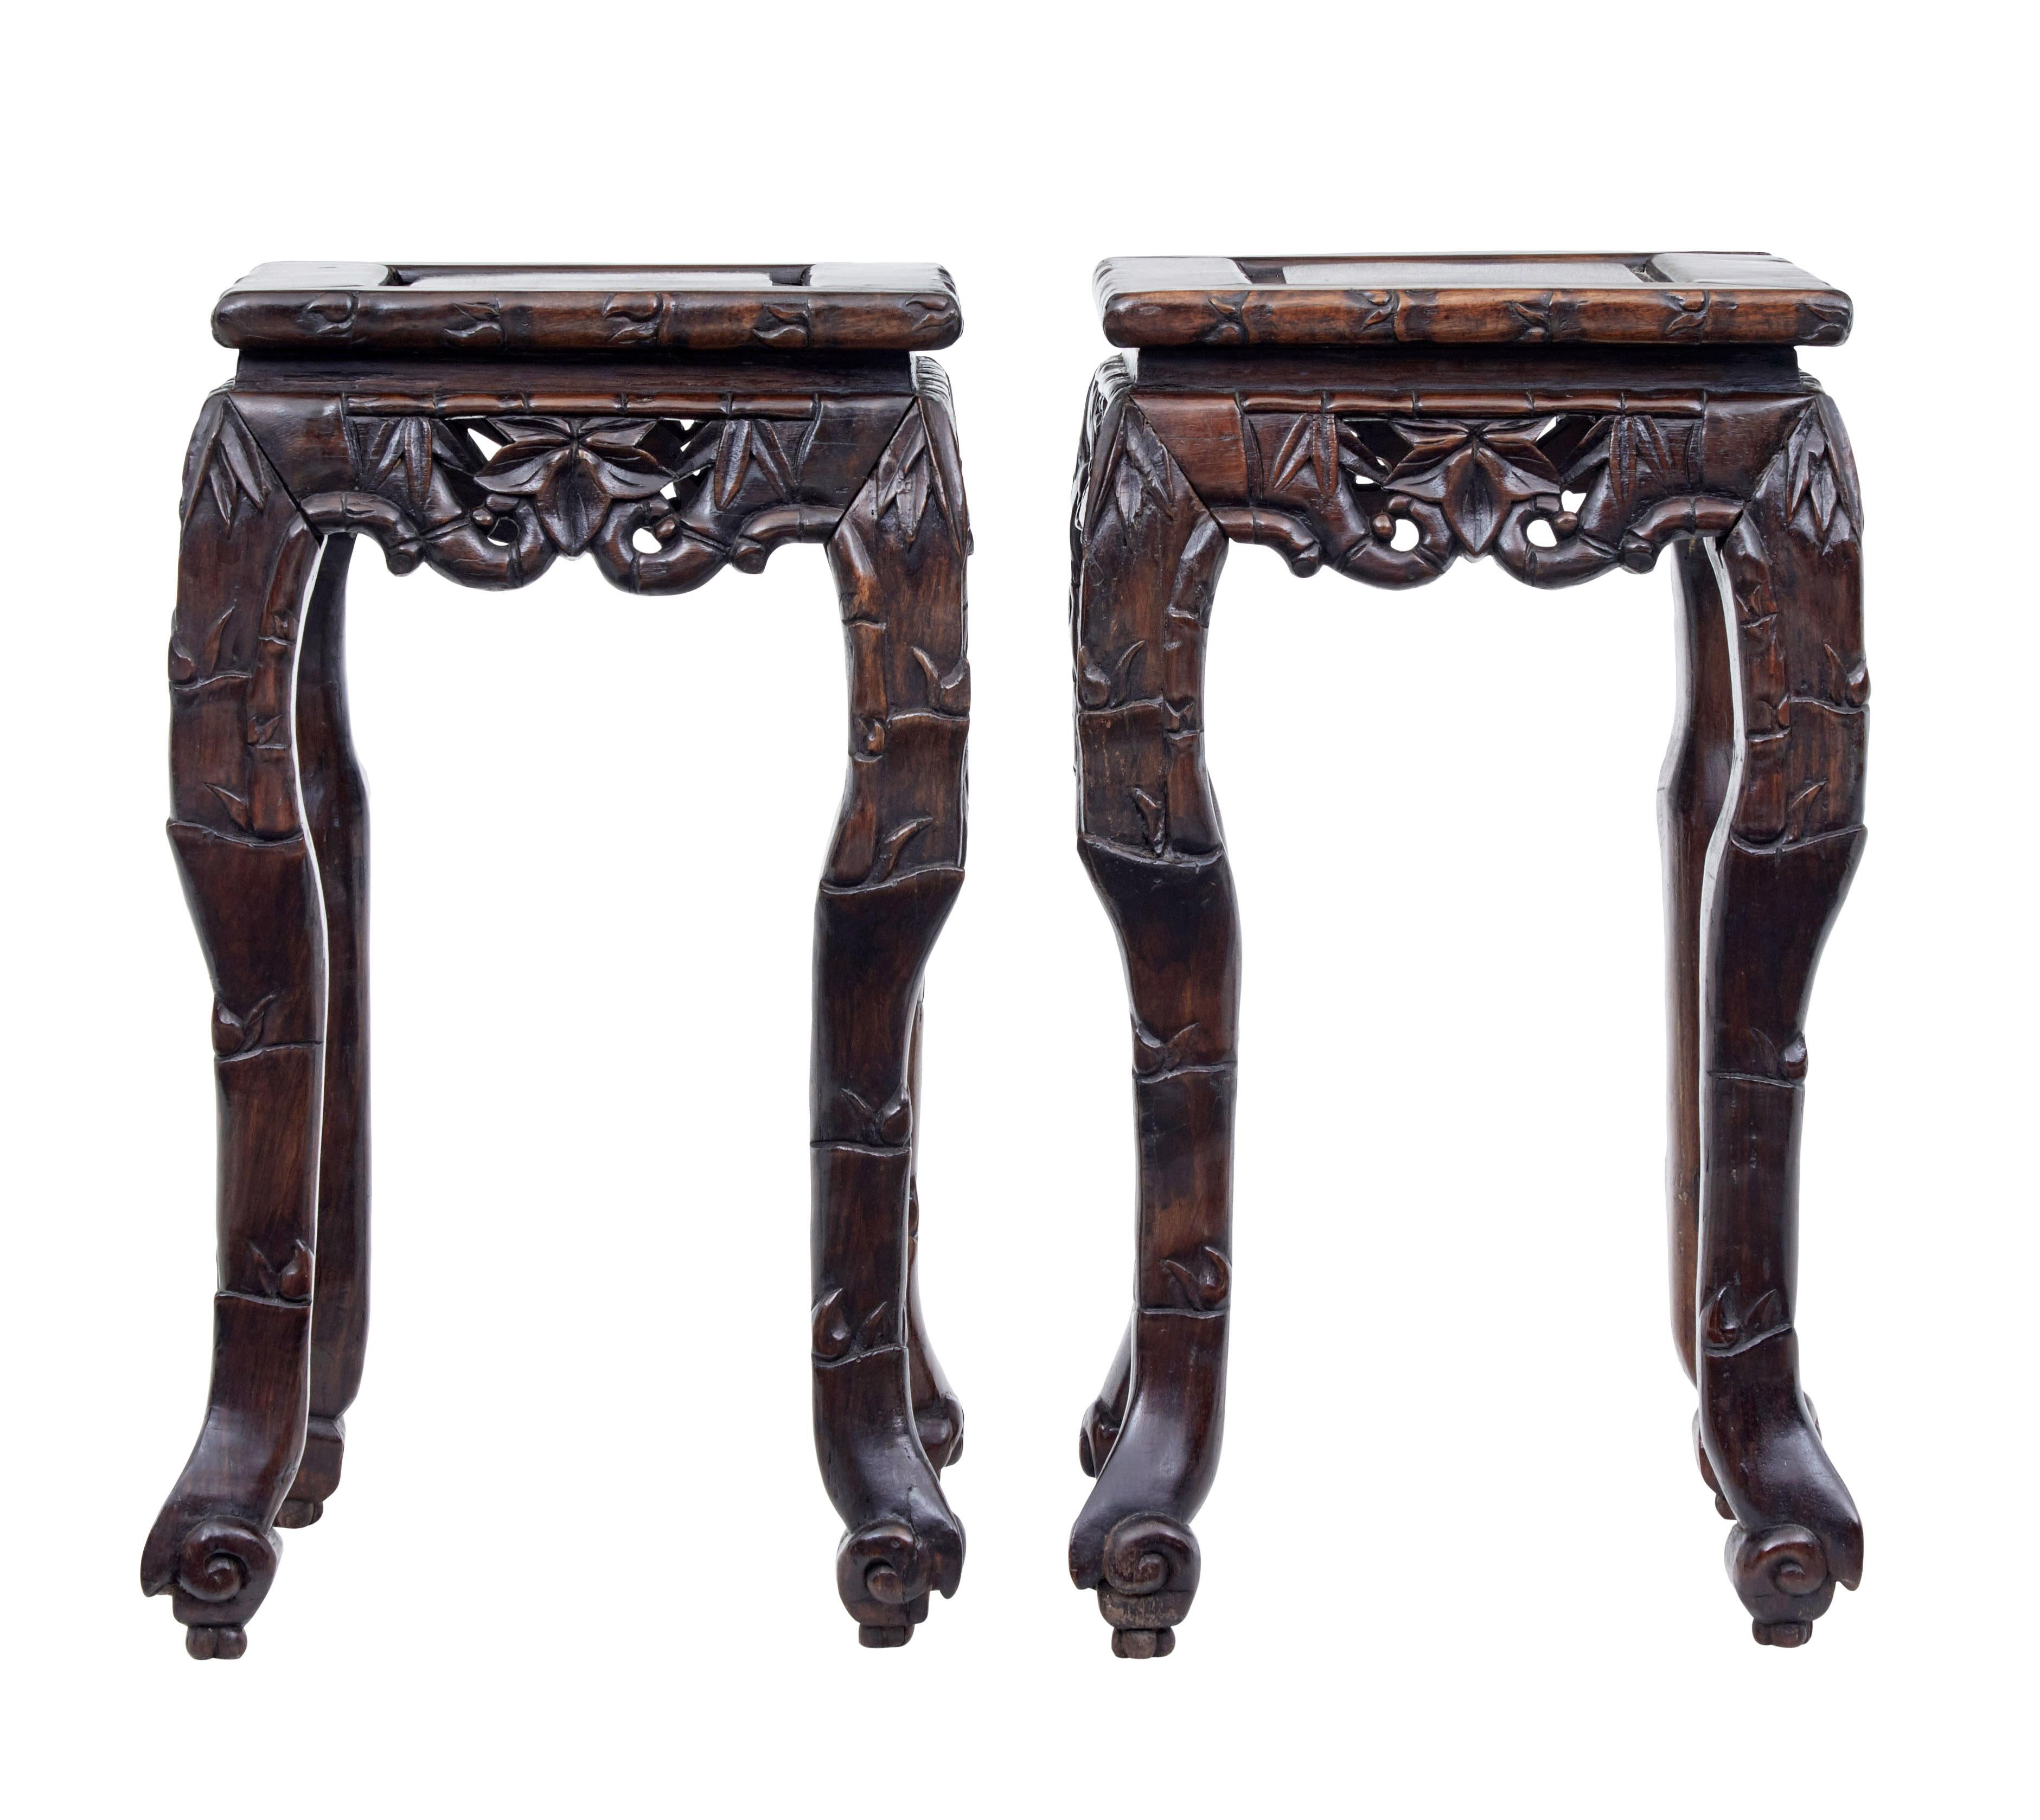 Chinese Export Pair of Late 19th Century Carved Chinese Tables